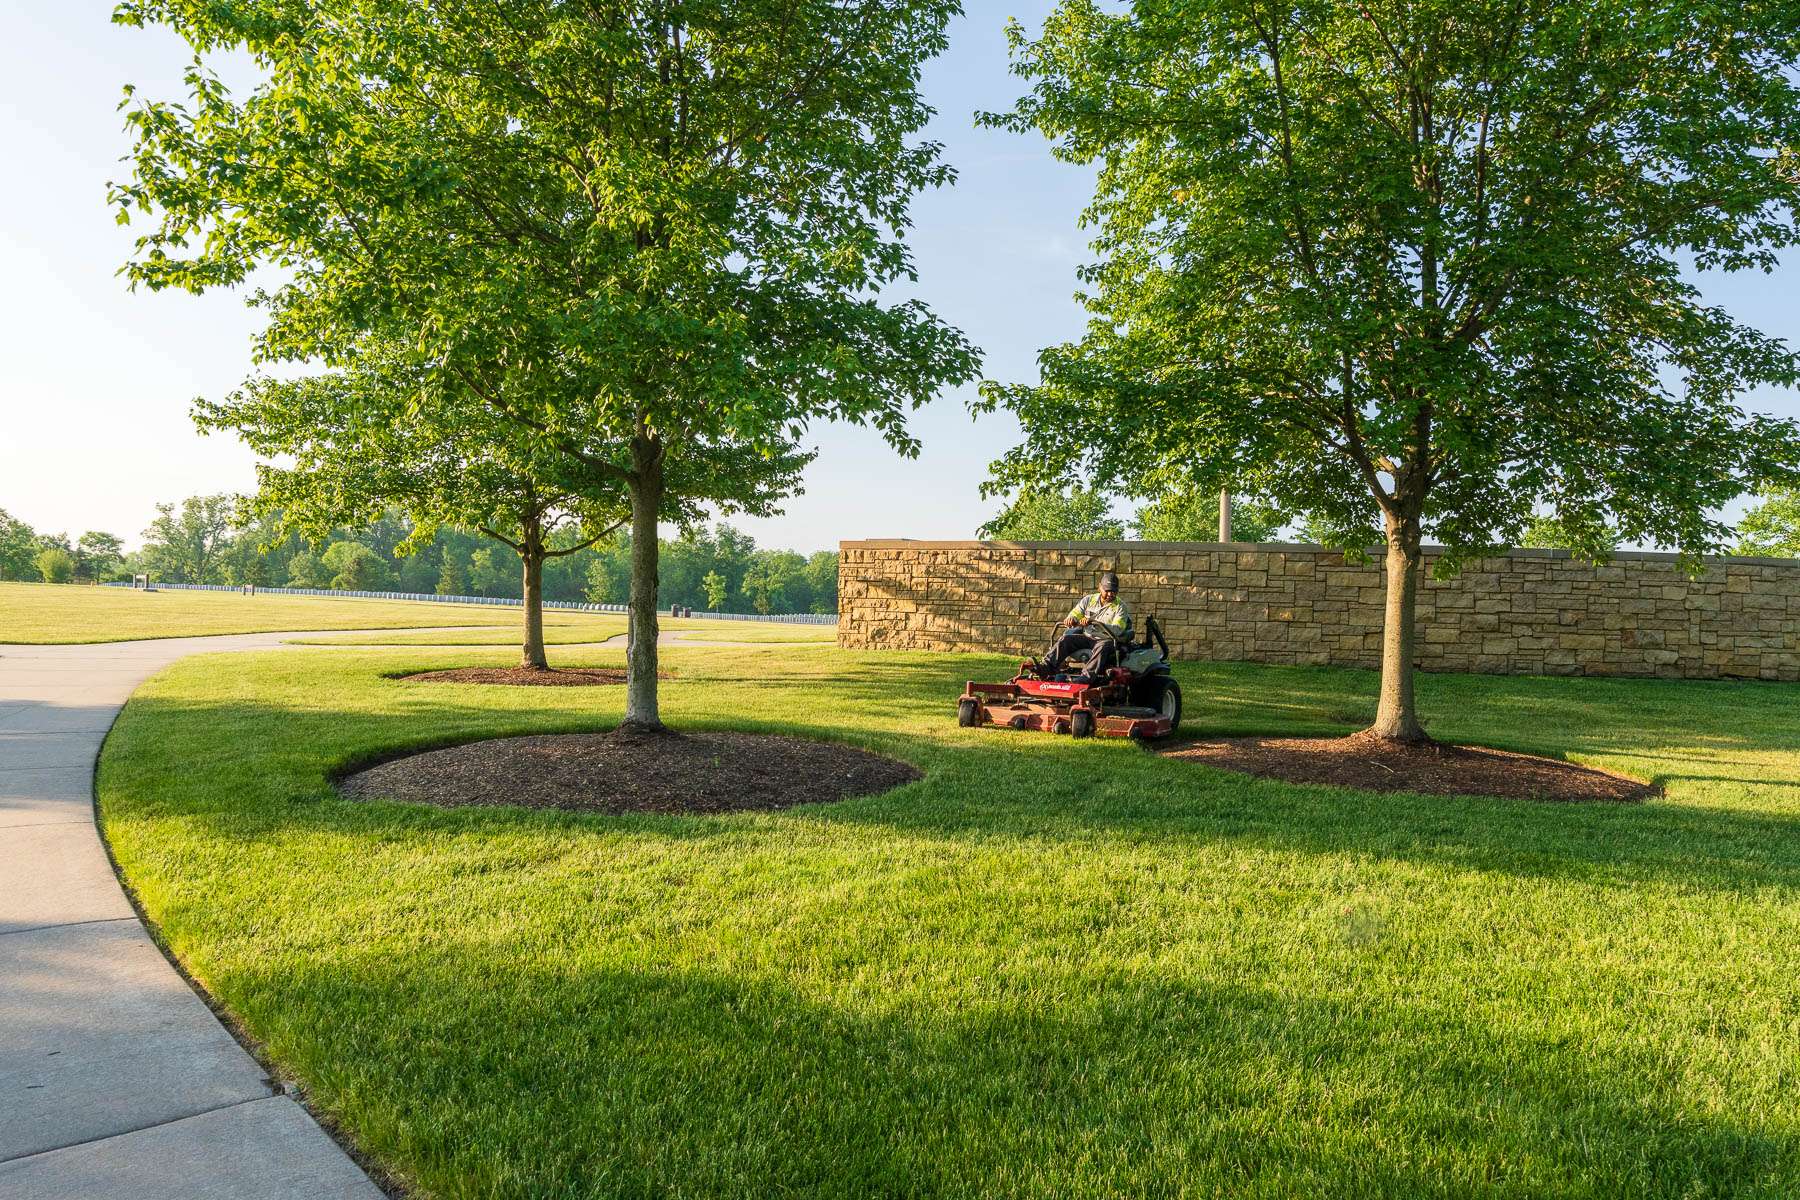 How Planting & Landscape Design Can Add Shade to Your Commercial Property